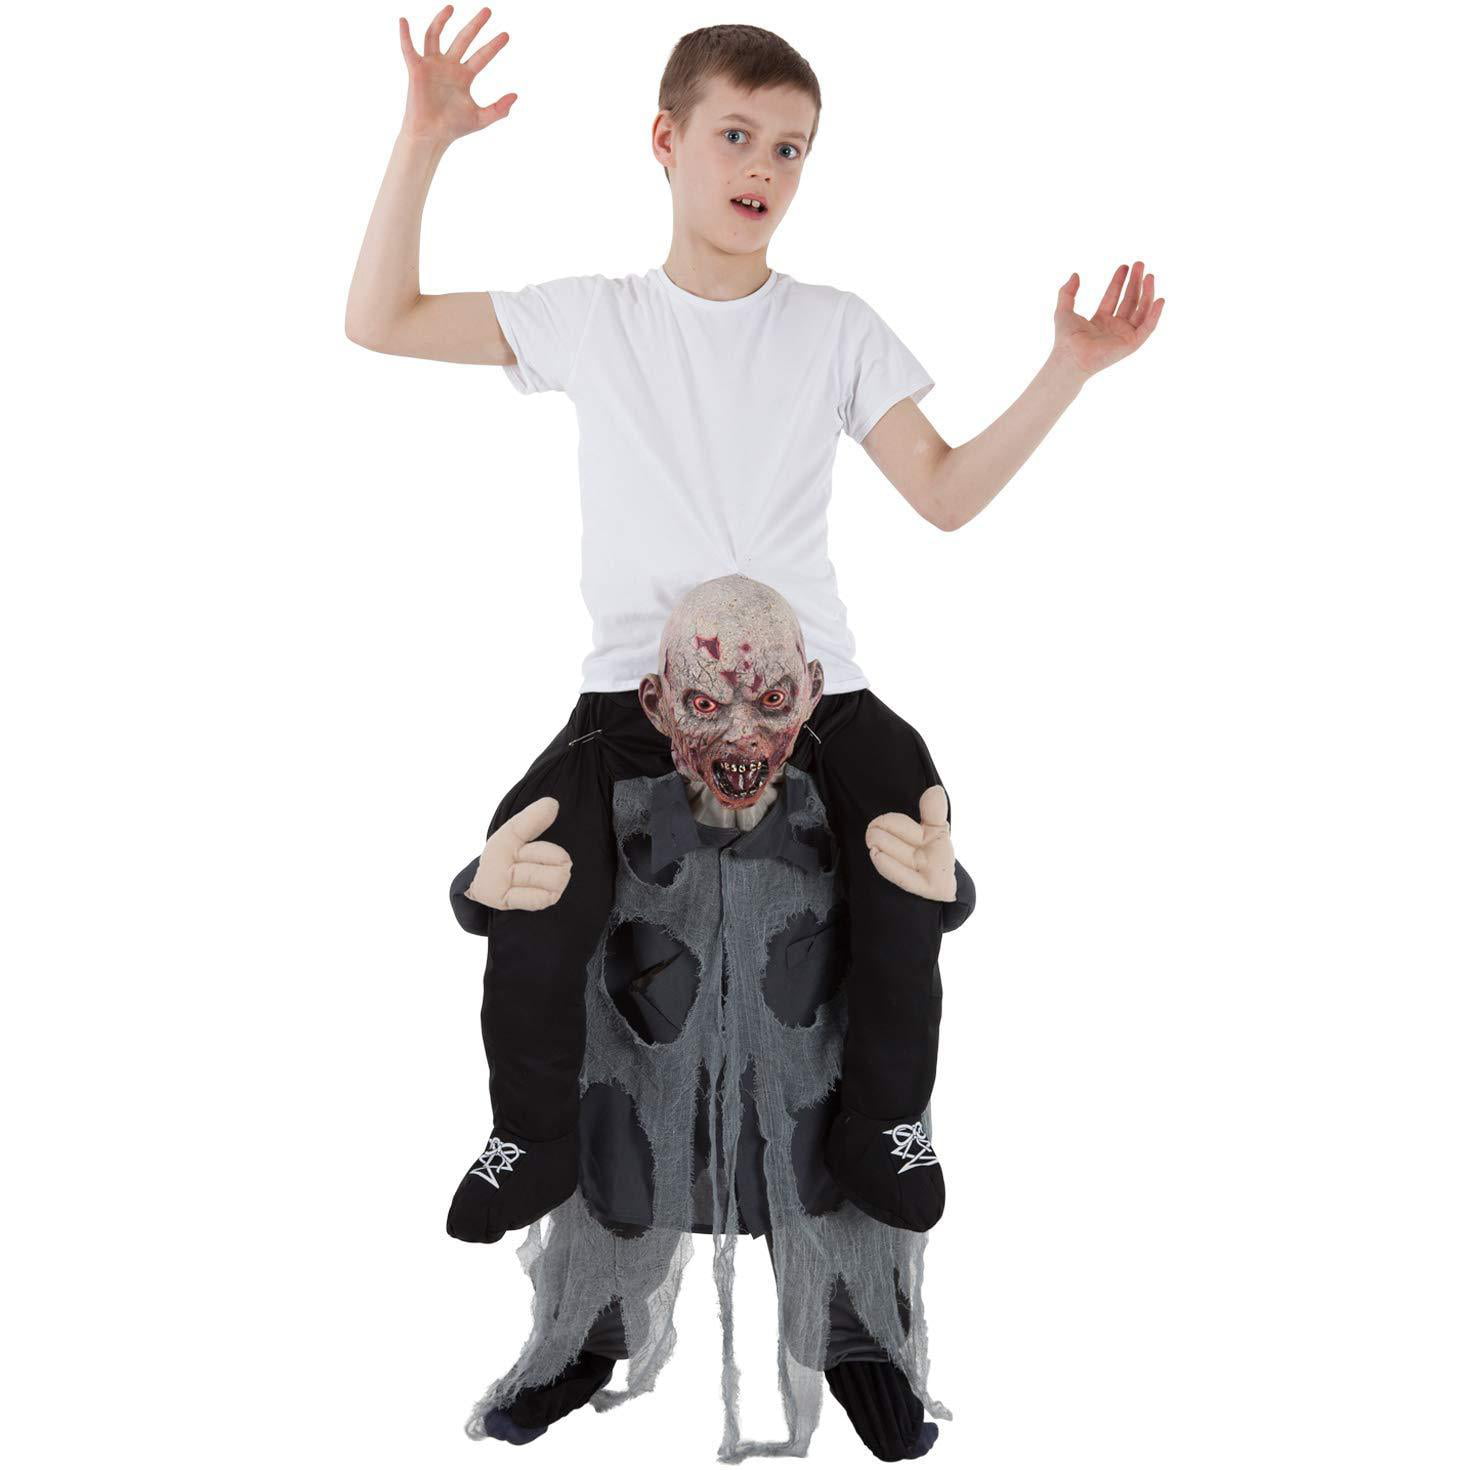 Adults Carry Me Skeleton Ride On Piggy Back Costume Halloween Fancy Dress